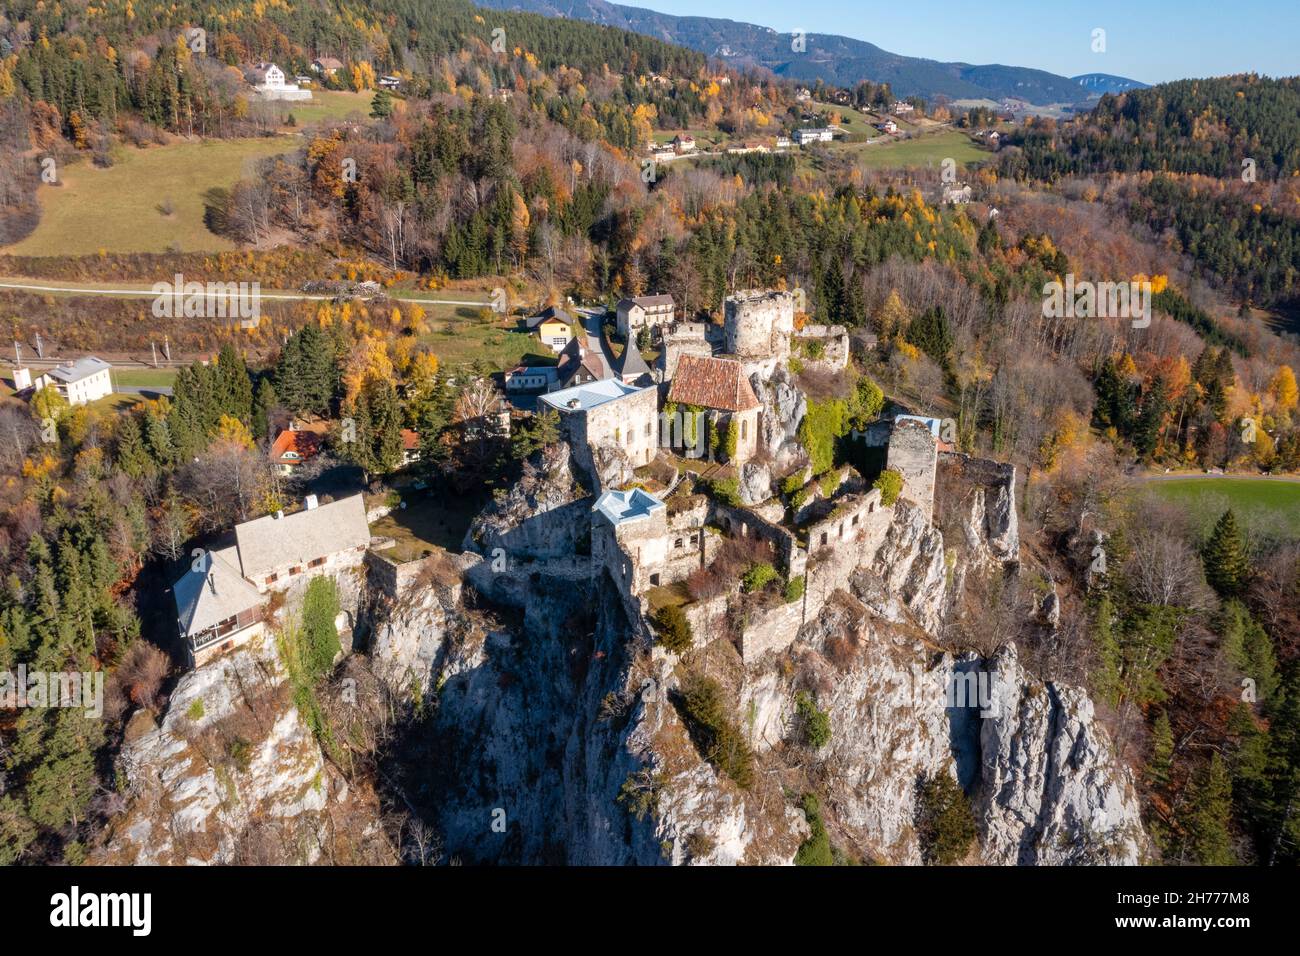 Klamm ruin close to Breitenstein at Semmering in Lower Austria, Europe. Scenic aerial view to the ancient old building during autumn. Stock Photo